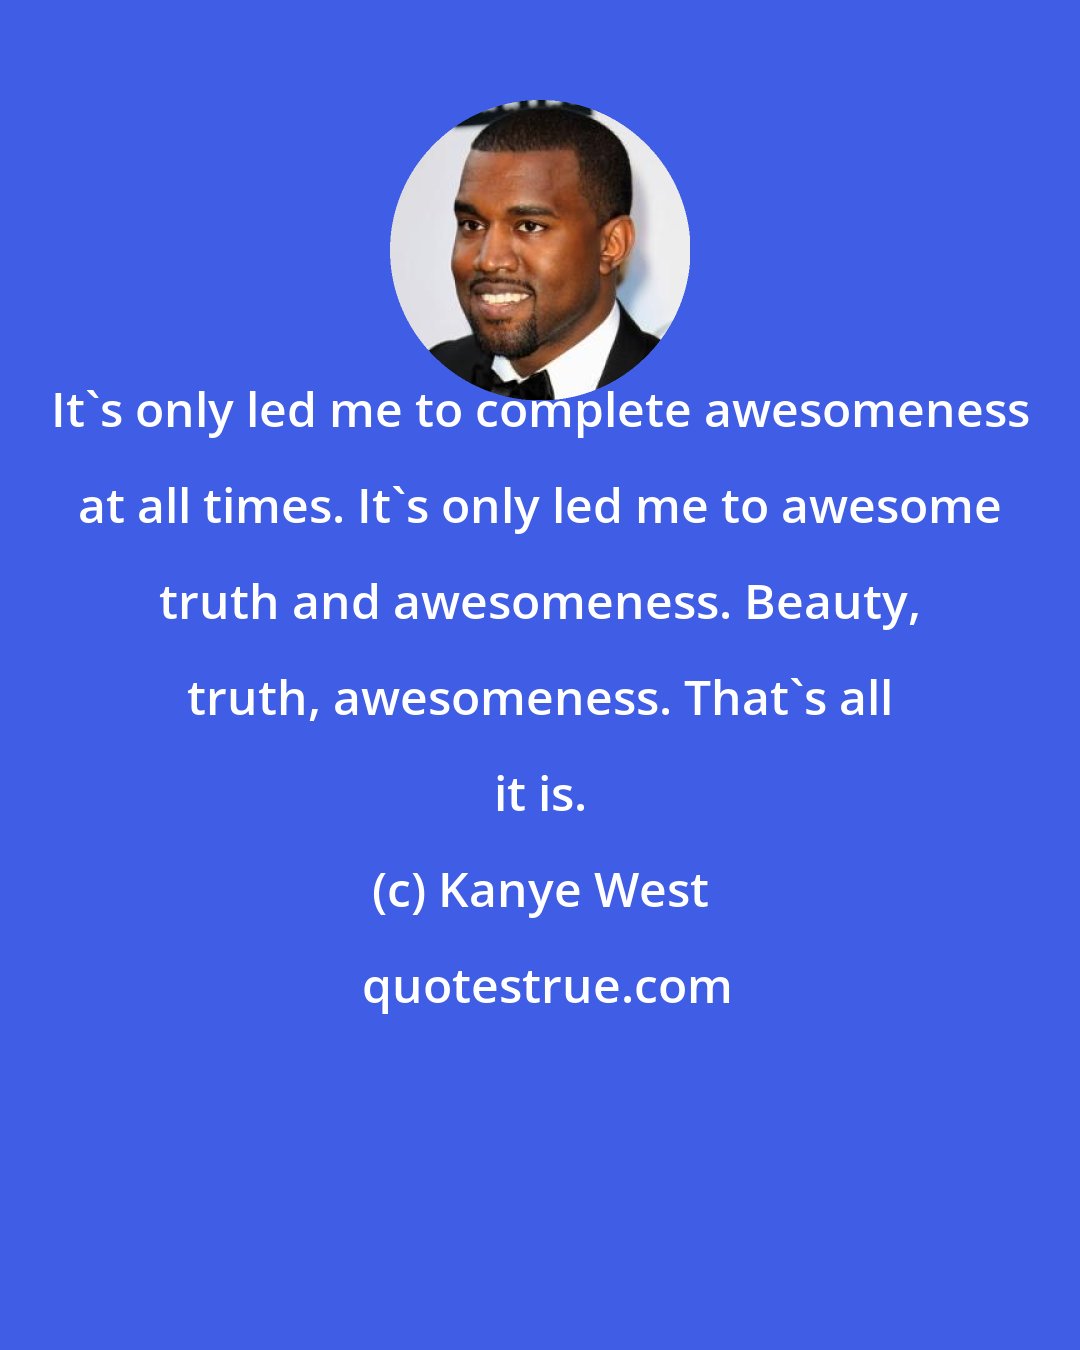 Kanye West: It's only led me to complete awesomeness at all times. It's only led me to awesome truth and awesomeness. Beauty, truth, awesomeness. That's all it is.